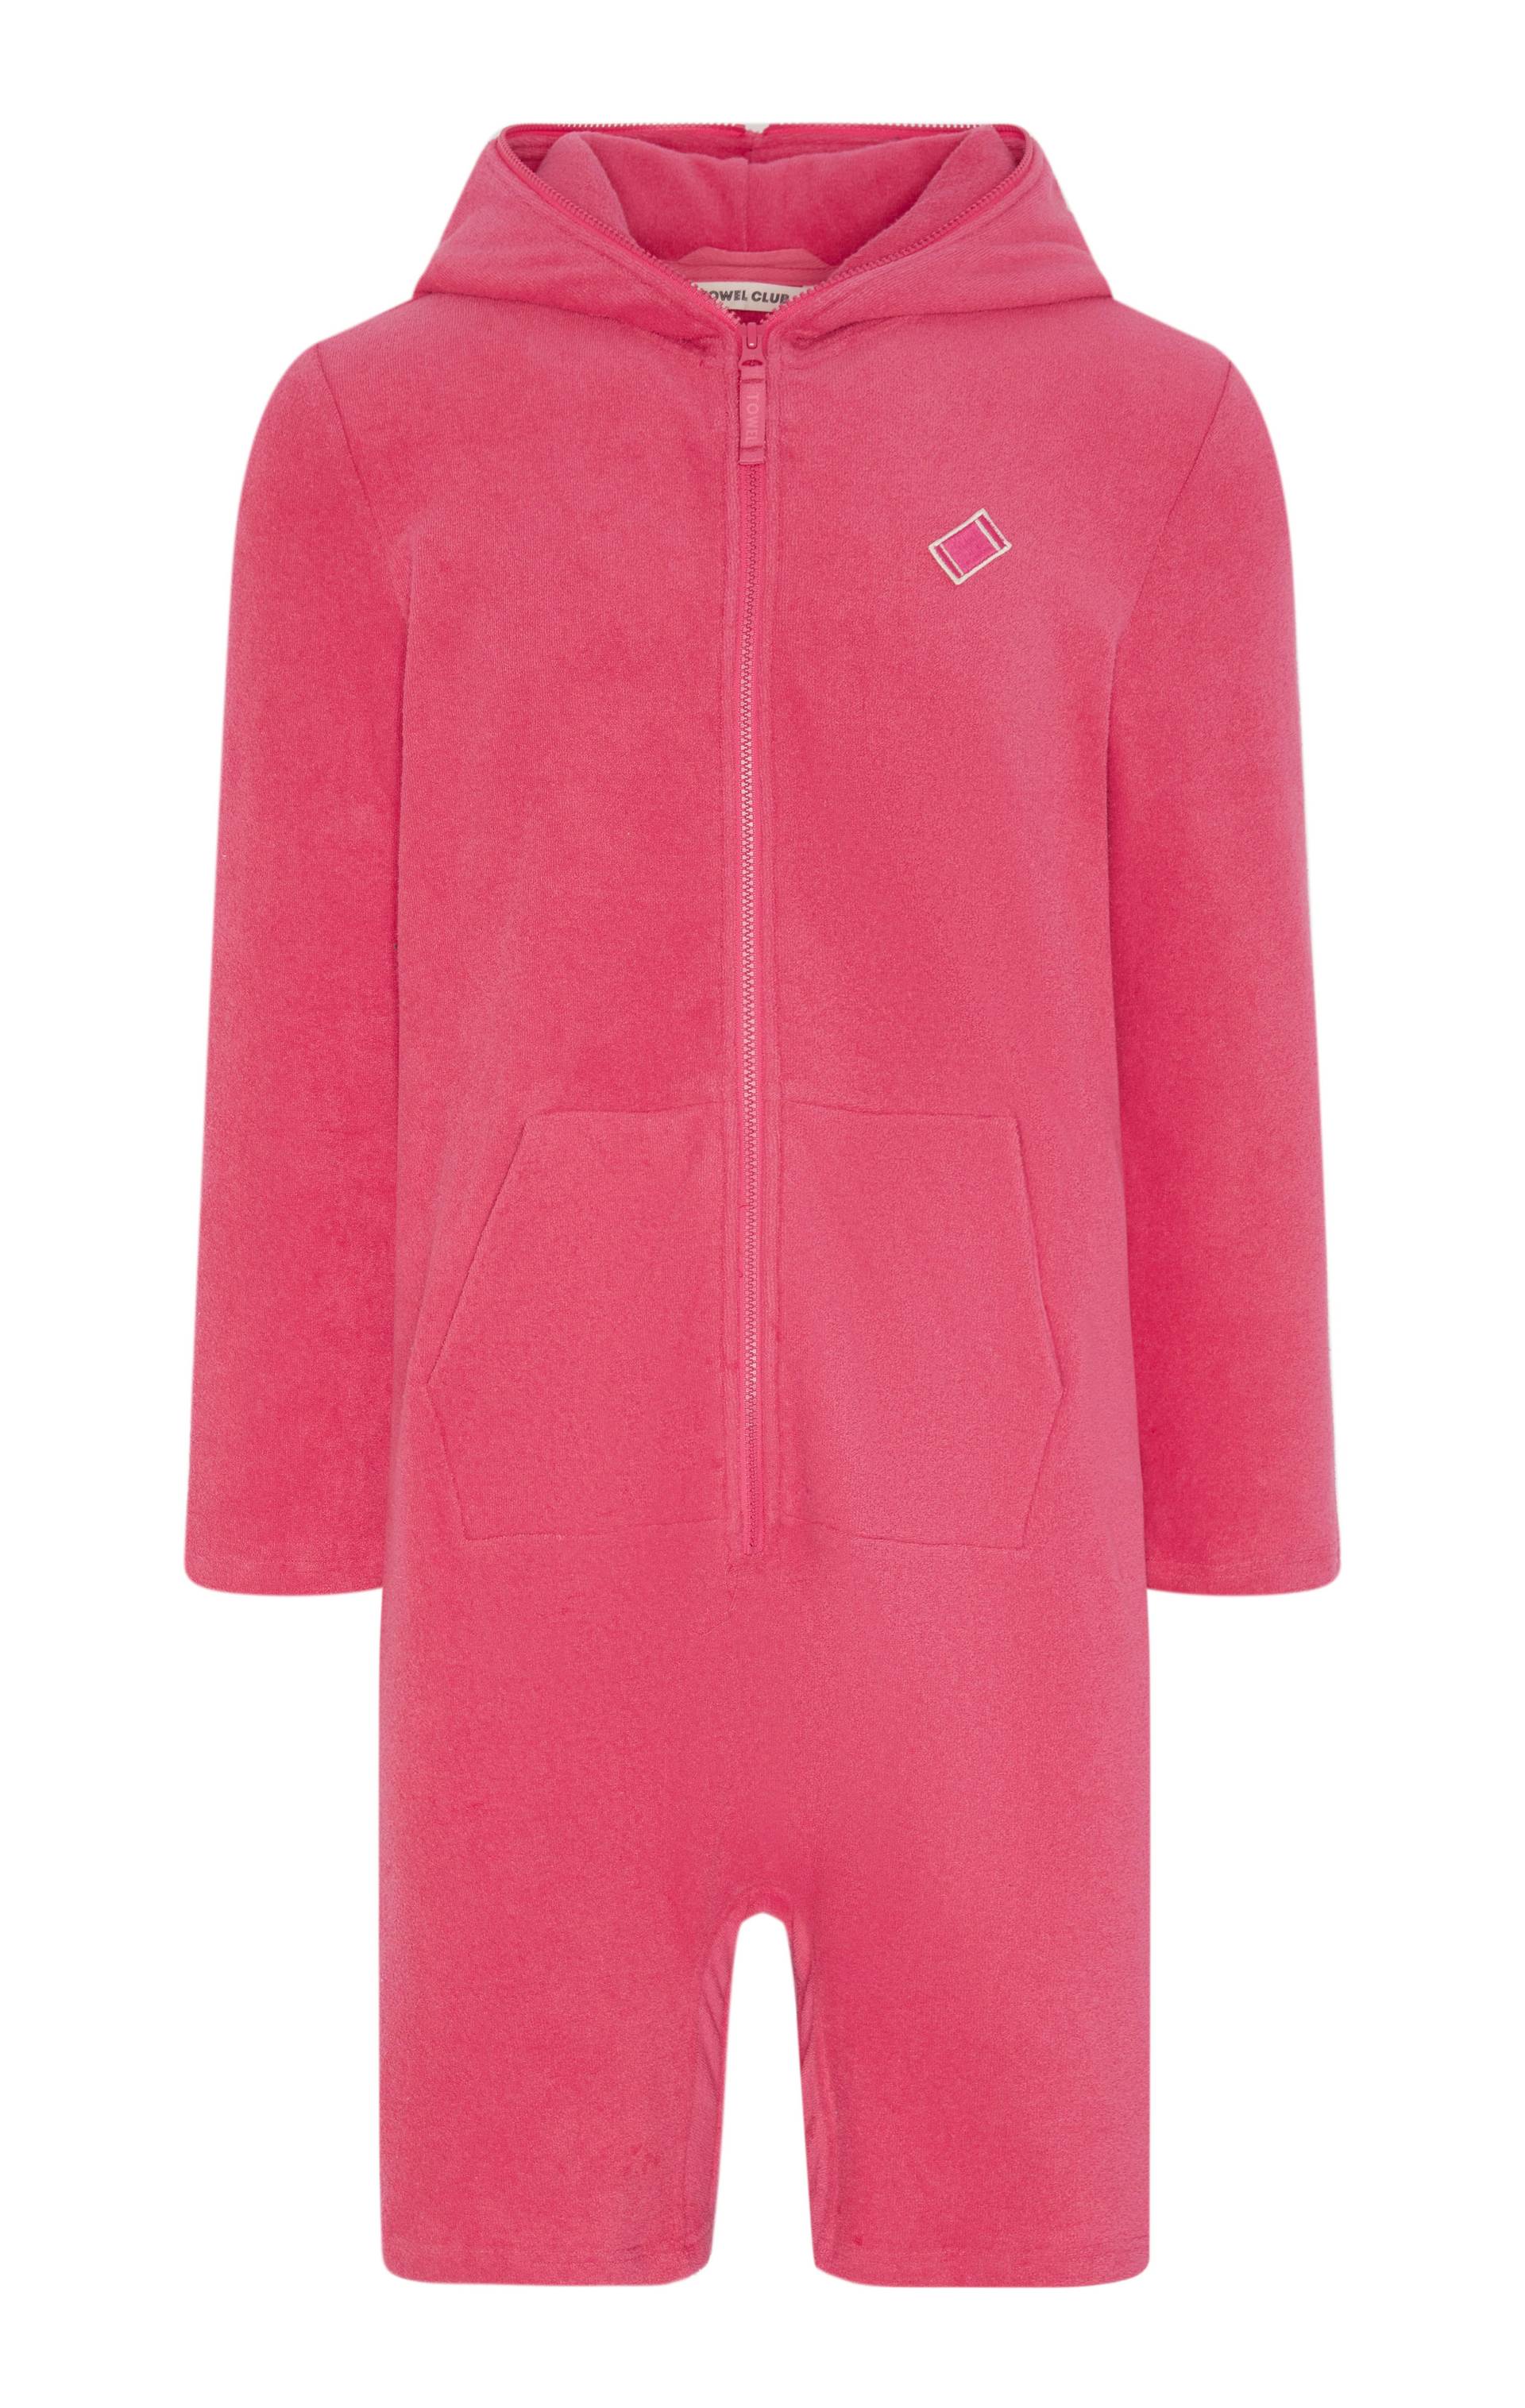 Towel Club Fitted Short Jumpsuit Pink - Onepiece